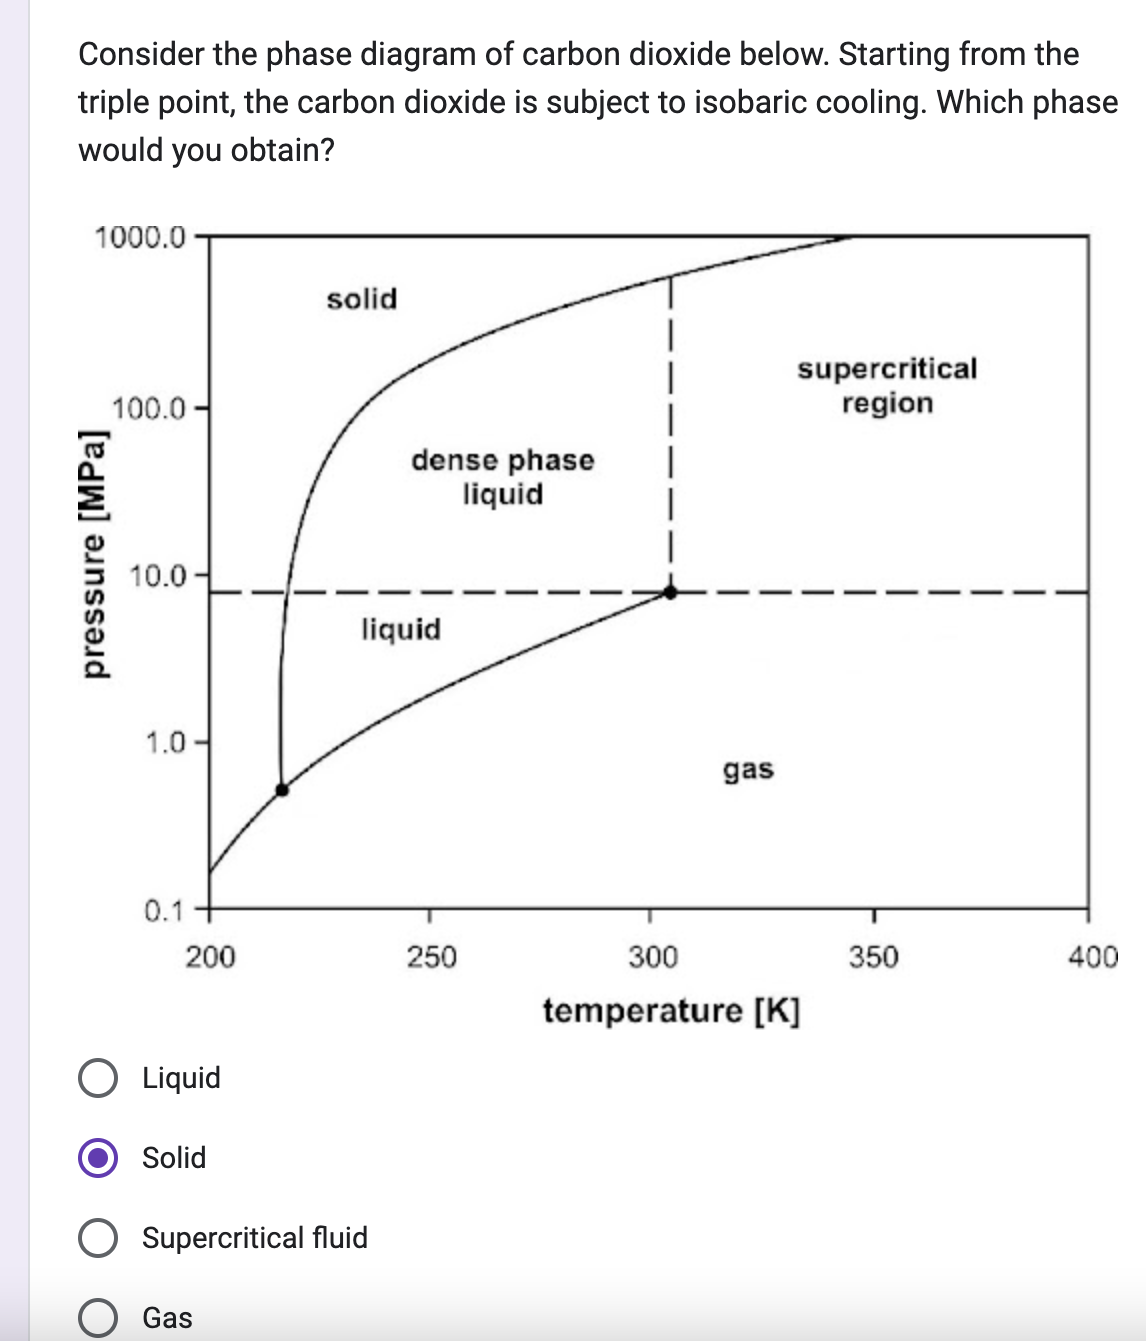 pressure [MPa]
Consider the phase diagram of carbon dioxide below. Starting from the
triple point, the carbon dioxide is subject to isobaric cooling. Which phase
would you obtain?
1000.0
solid
100.0
10.0
1.0.
supercritical
region
dense phase
liquid
liquid
0.1
200
250
300
○ Liquid
Solid
Supercritical fluid
Gas
gas
temperature [K]
350
400